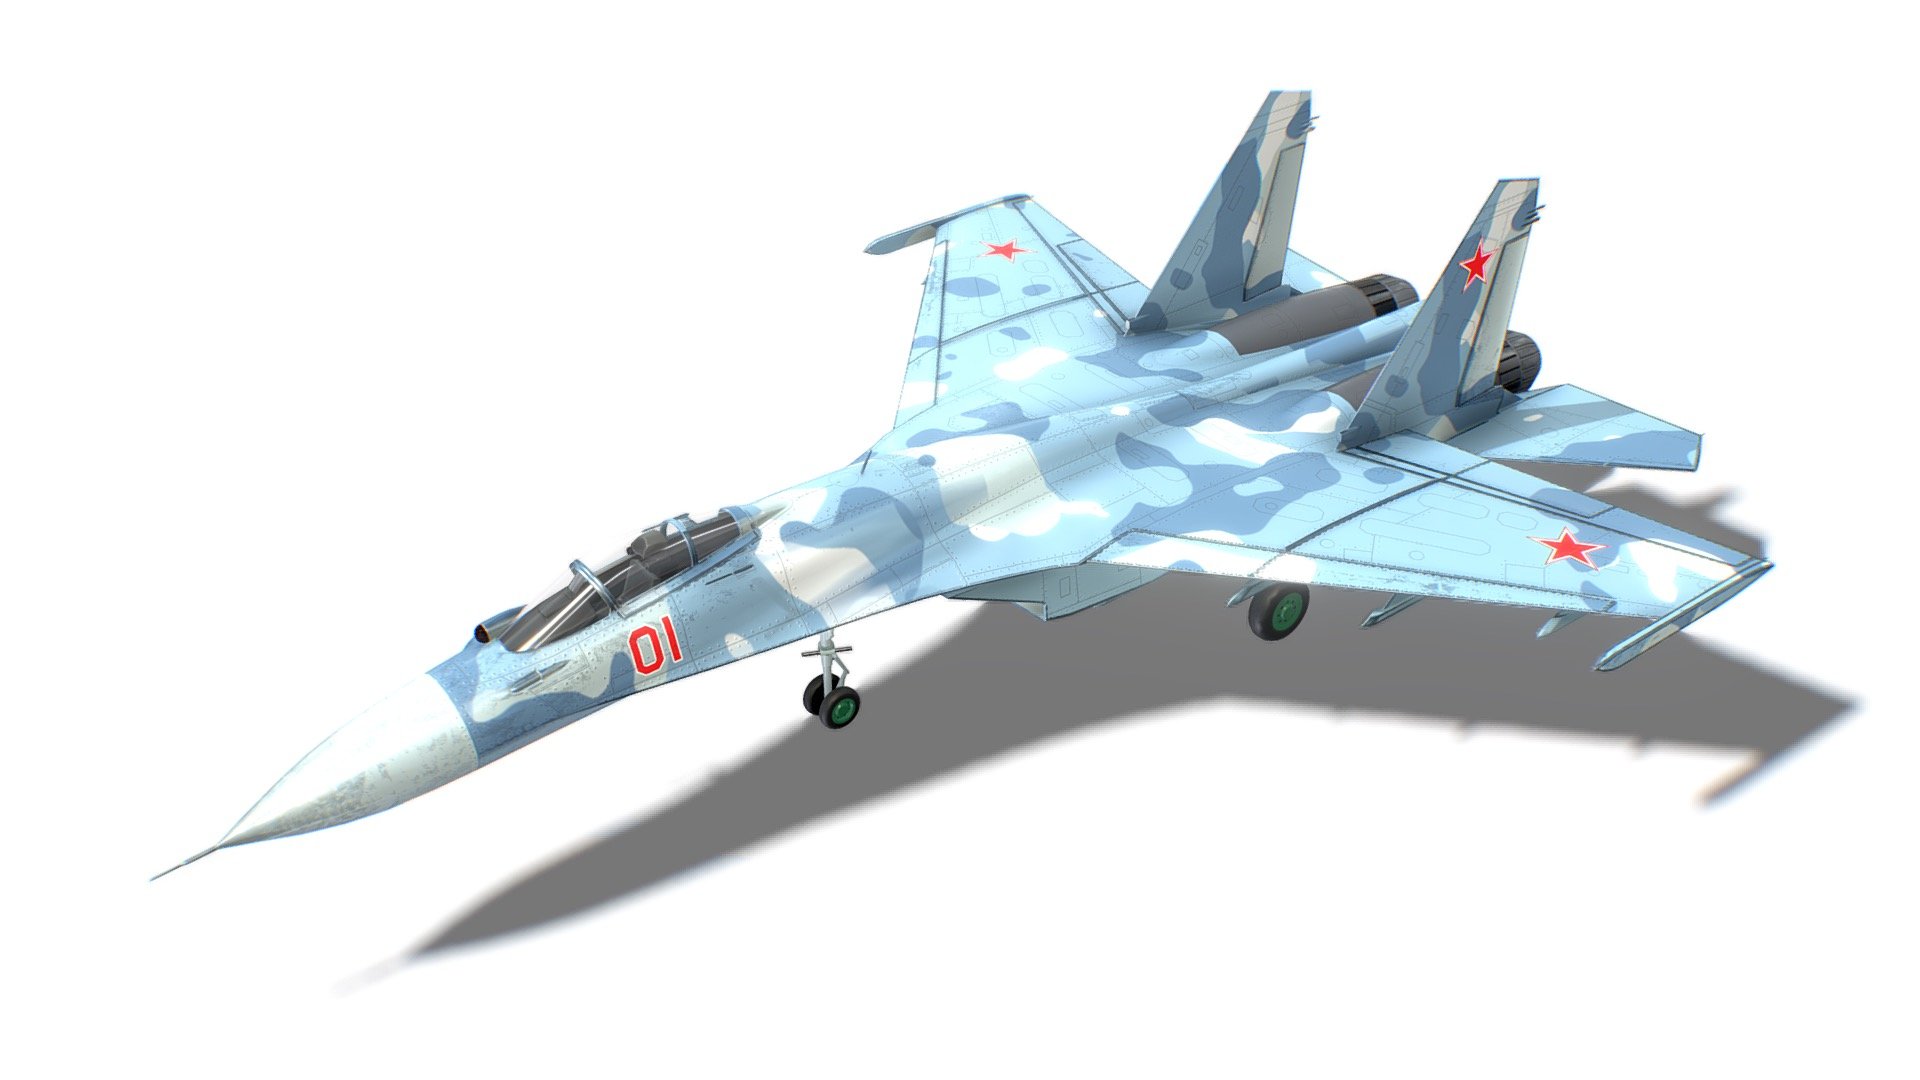 SU-27 Flanker Jet Fighter Aircraft